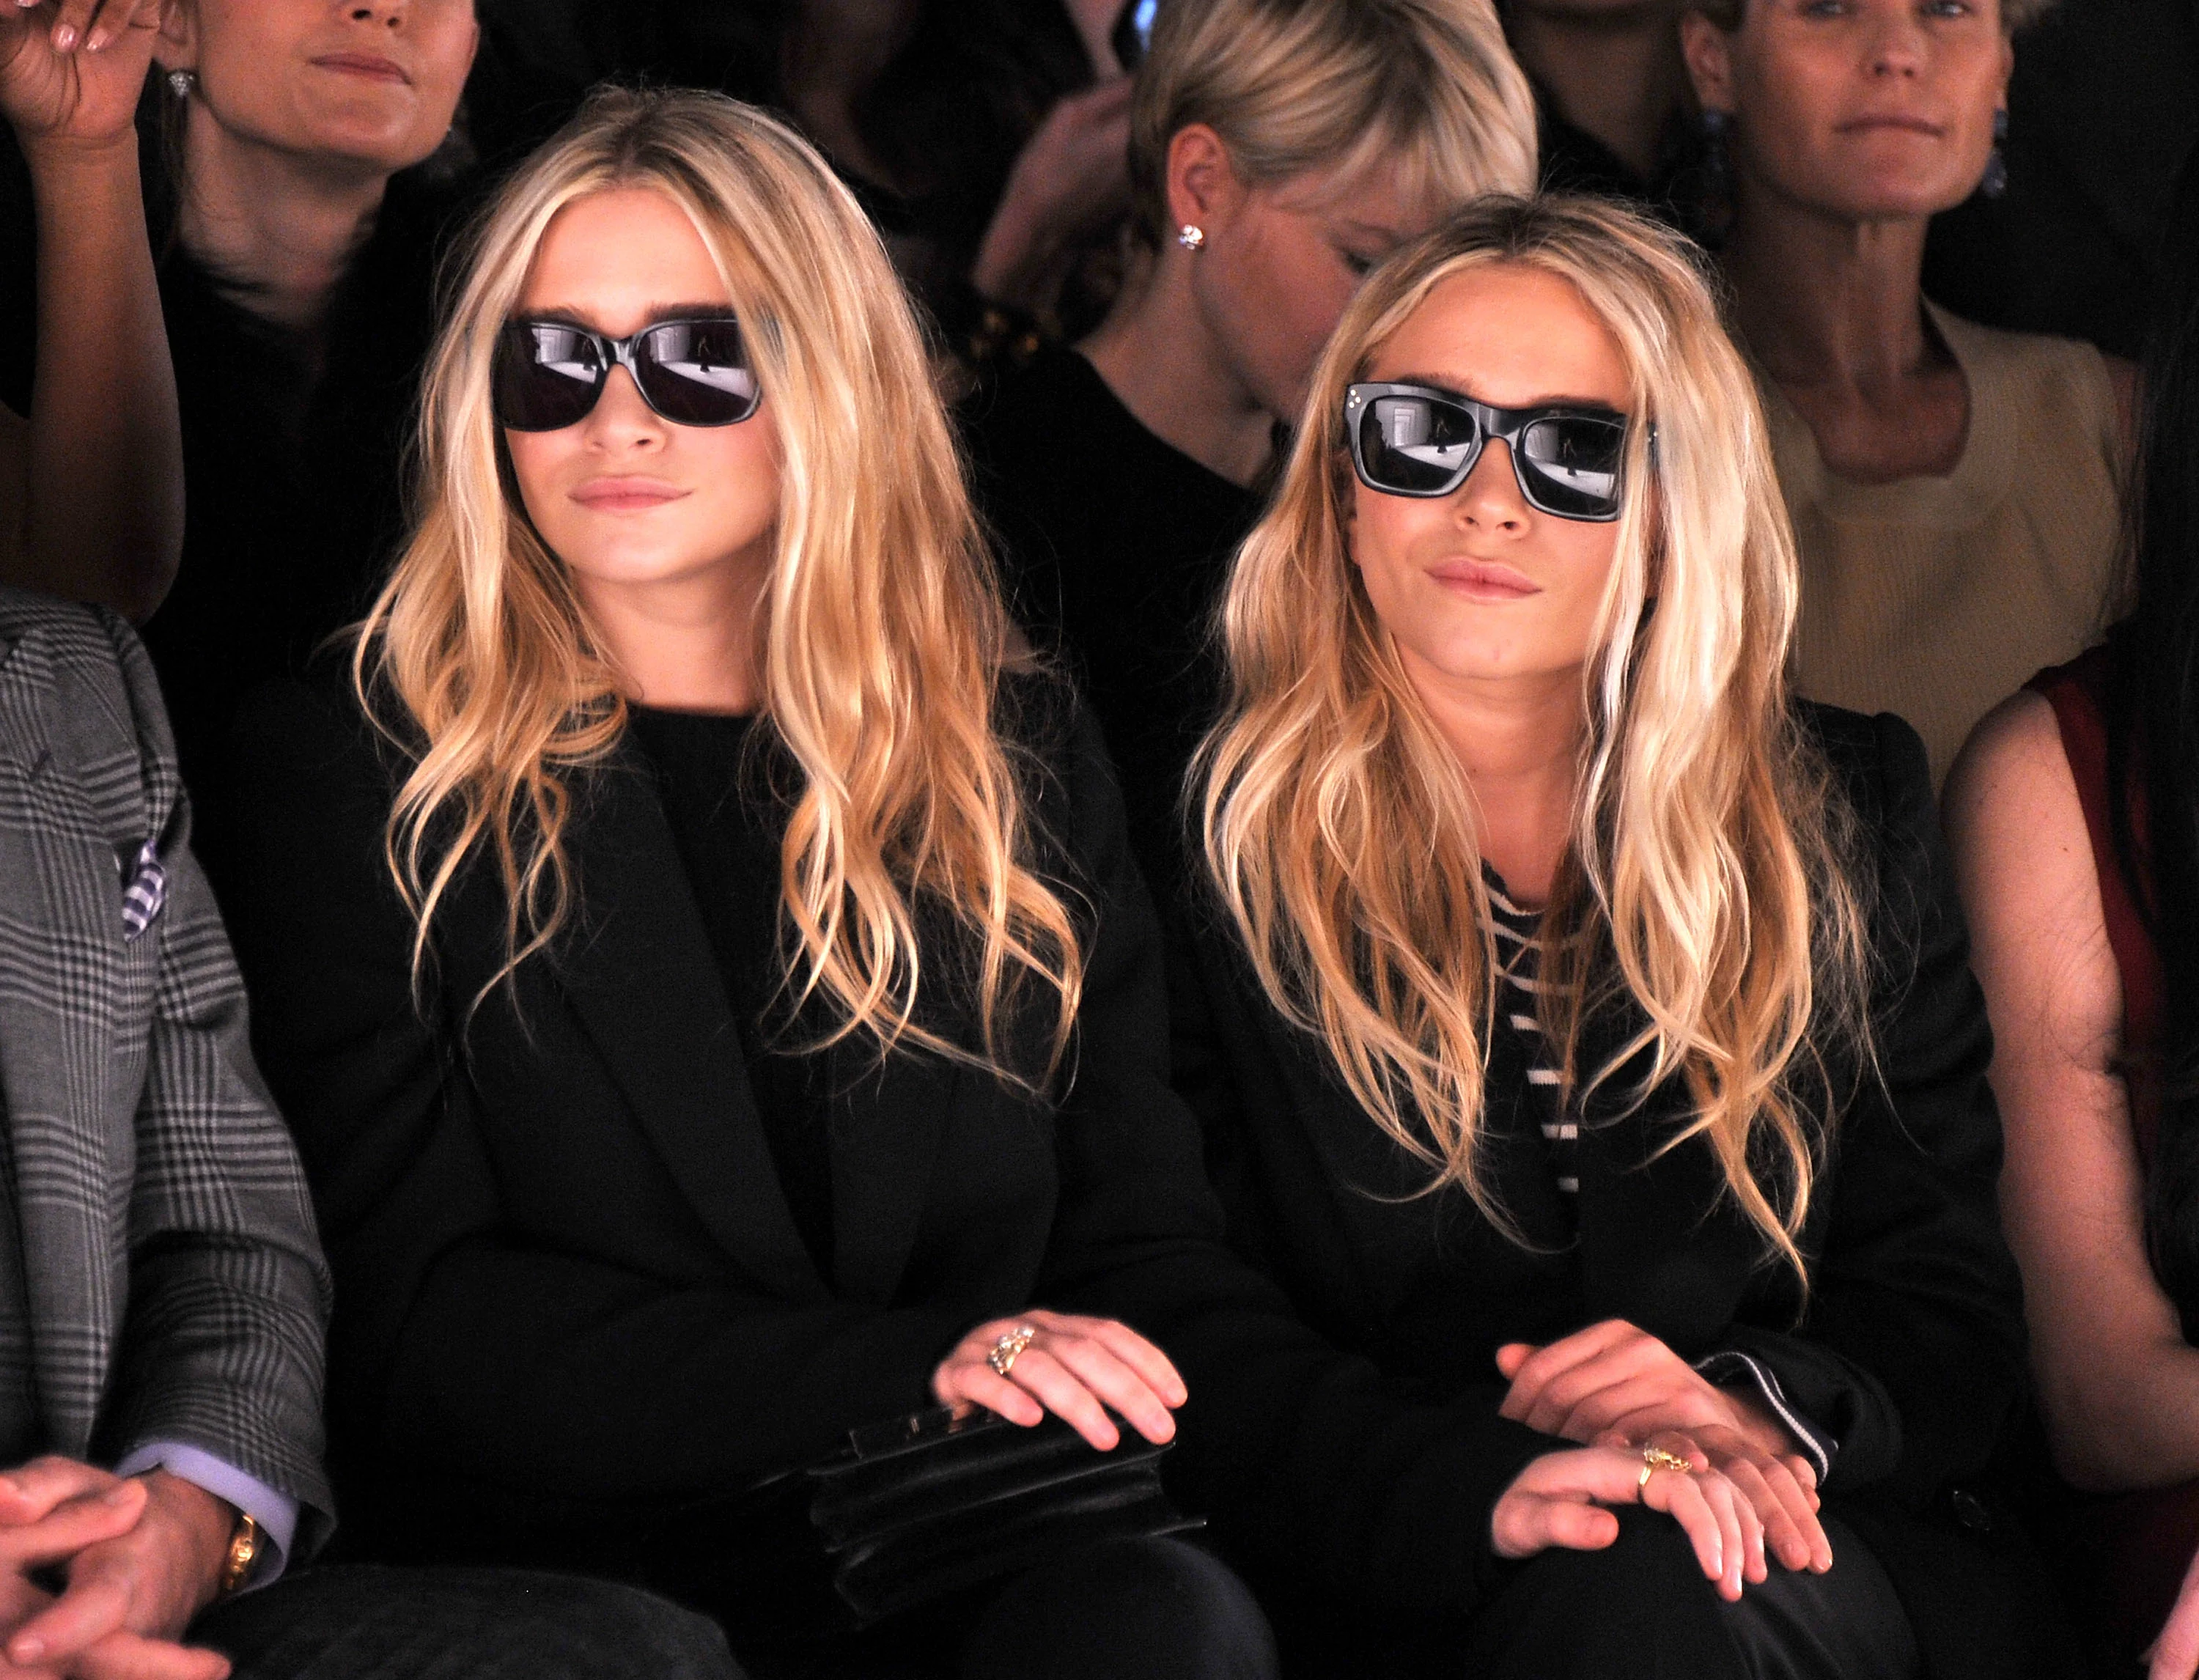 Ashley Olsen and Mary-Kate Olsen attend the J. Mendel Fall 2012 fashion show during Mercedes-Benz Fashion Week at The Theatre at Lincoln Center on February 15, 2012 in New York City. (Photo by Stephen Lovekin/Getty Images for Mercedes-Benz Fashion Week)